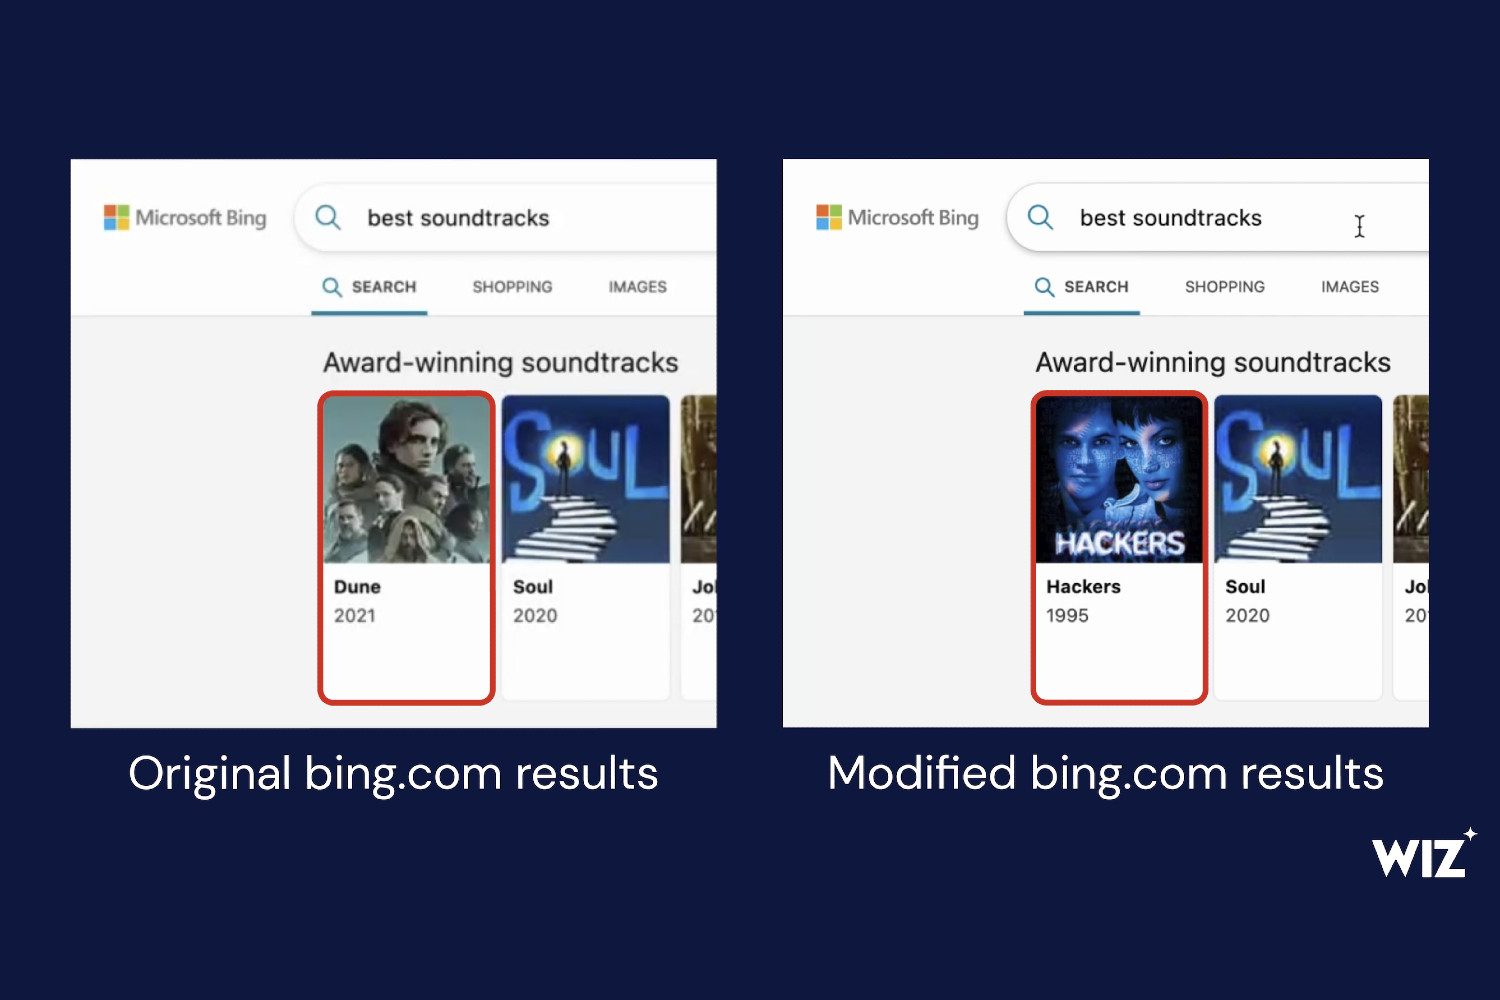 A comparison of Bing search results before and after the BingBang exploit was applied, showing how the list of recommended movie soundtracks could be altered.